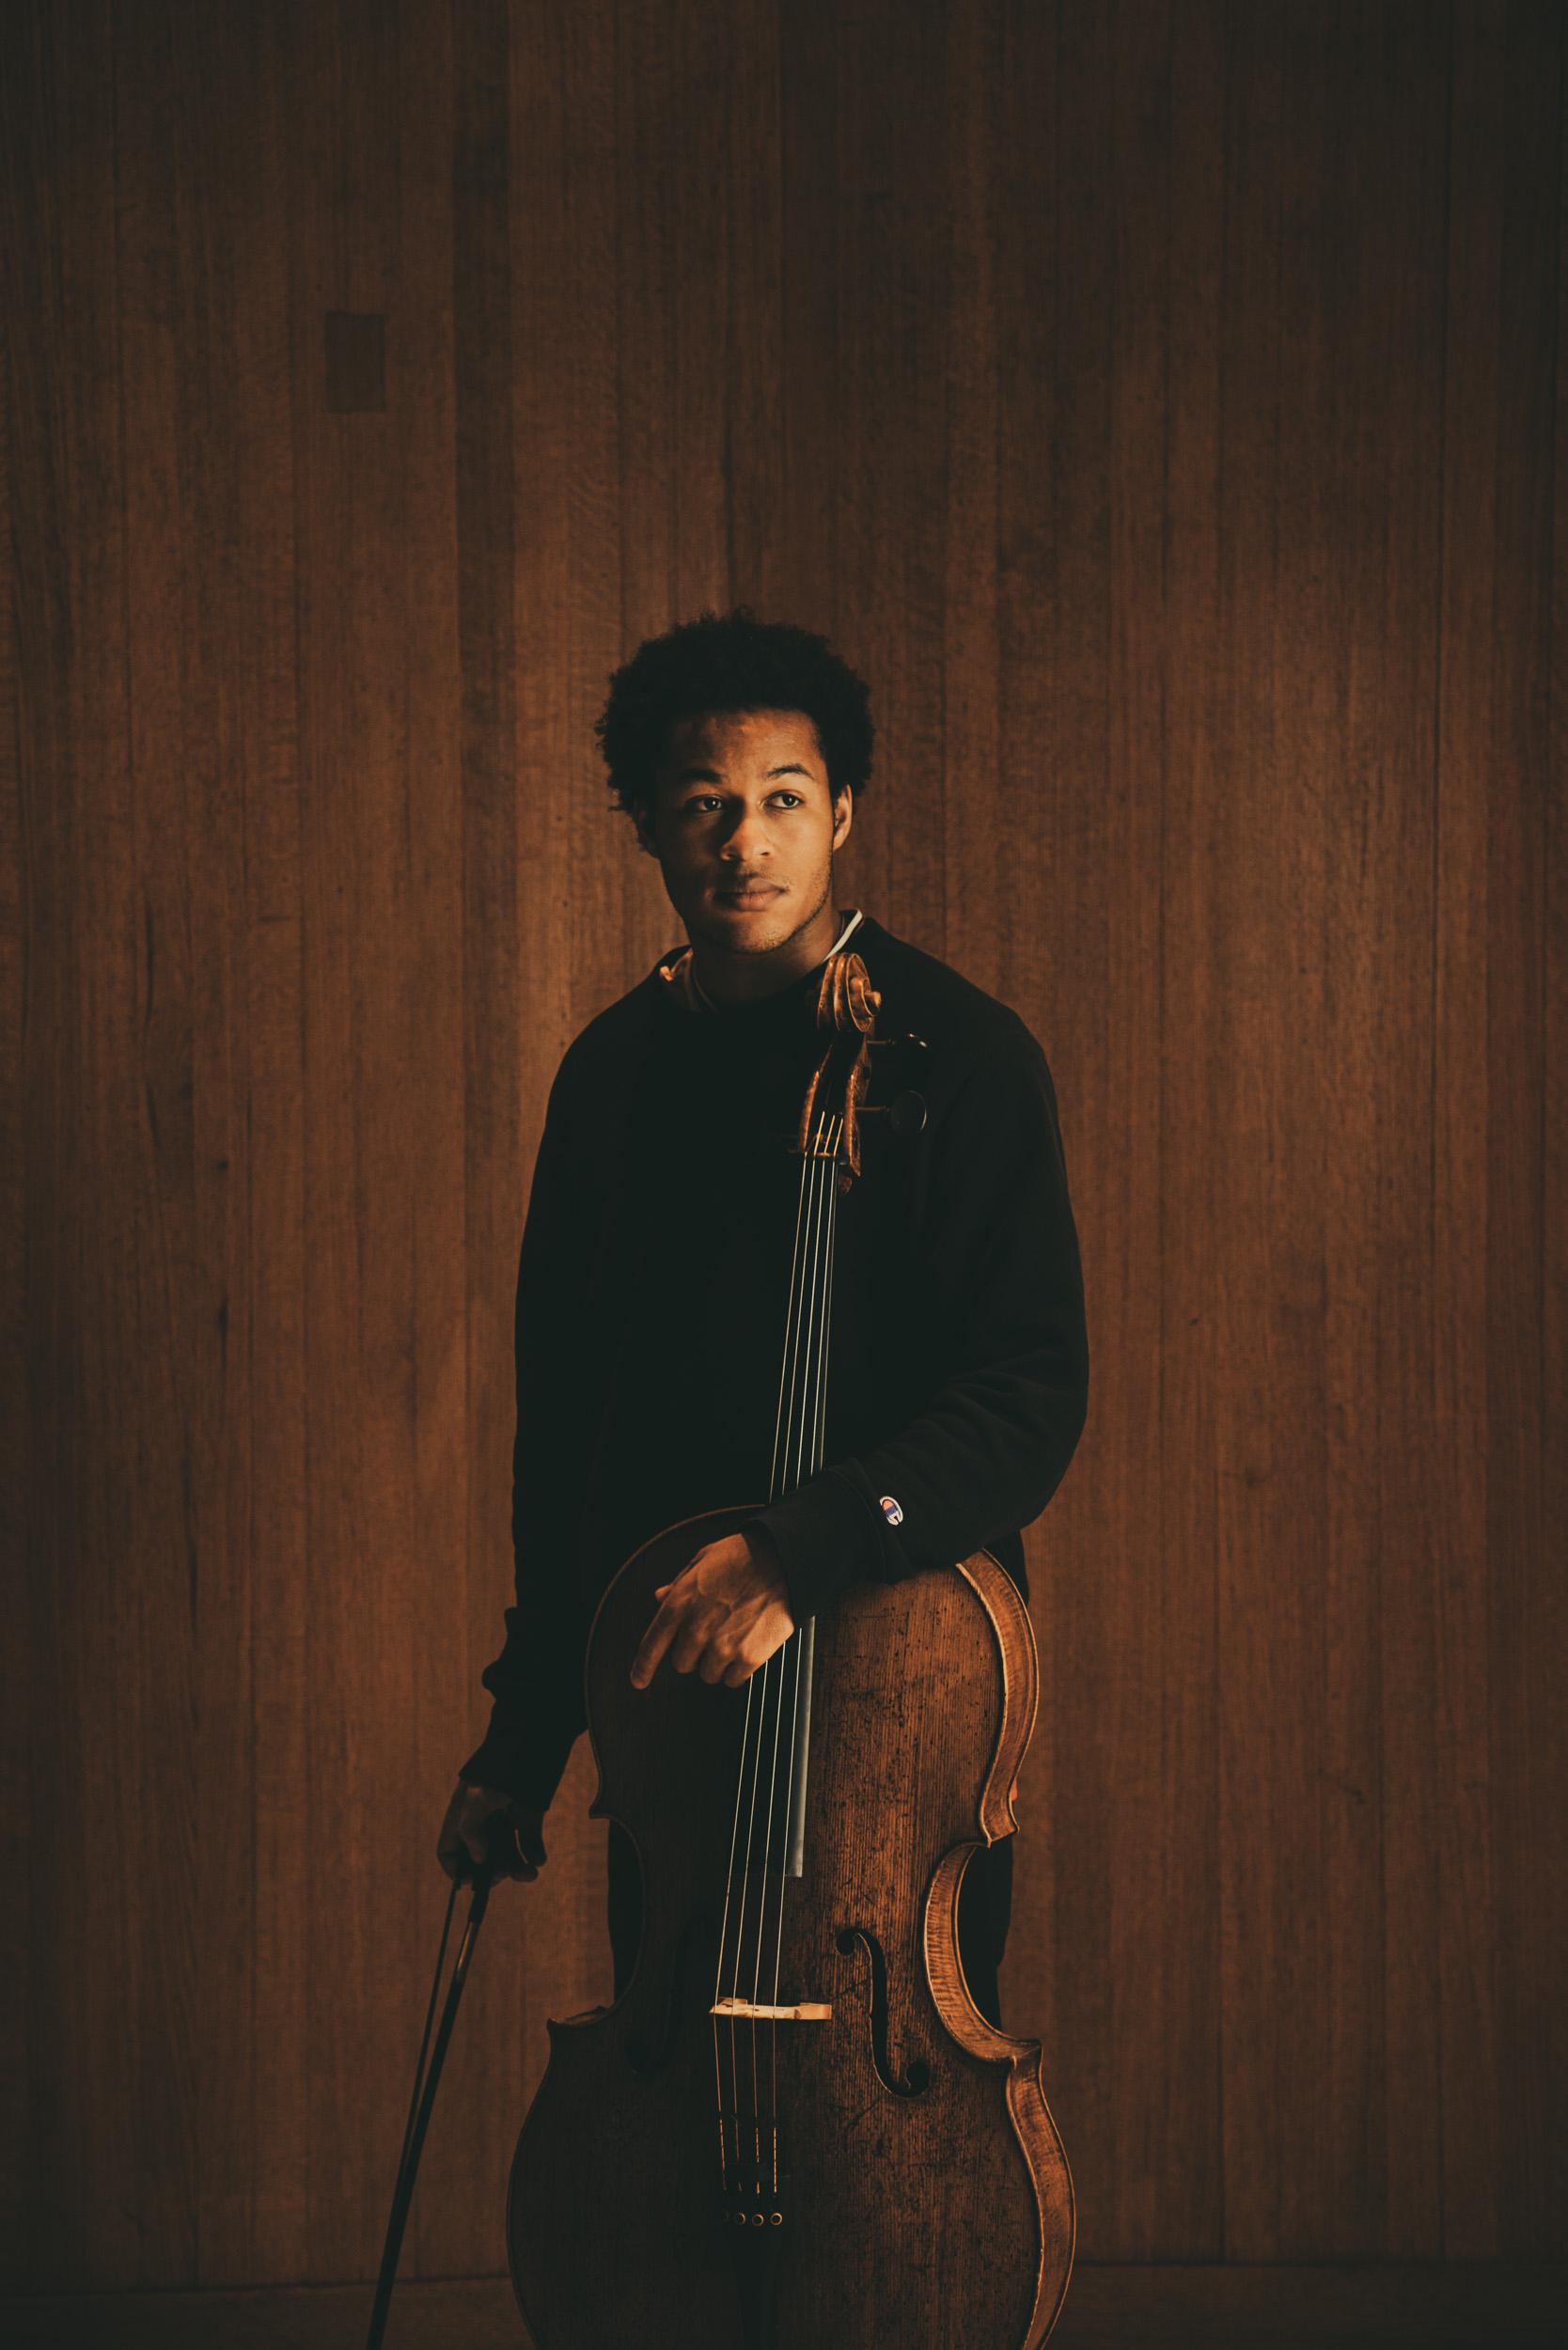 Sheku Kanneh-Mason, a famous cellist from London, rehearses with the Baltimore Symphony Orchestra